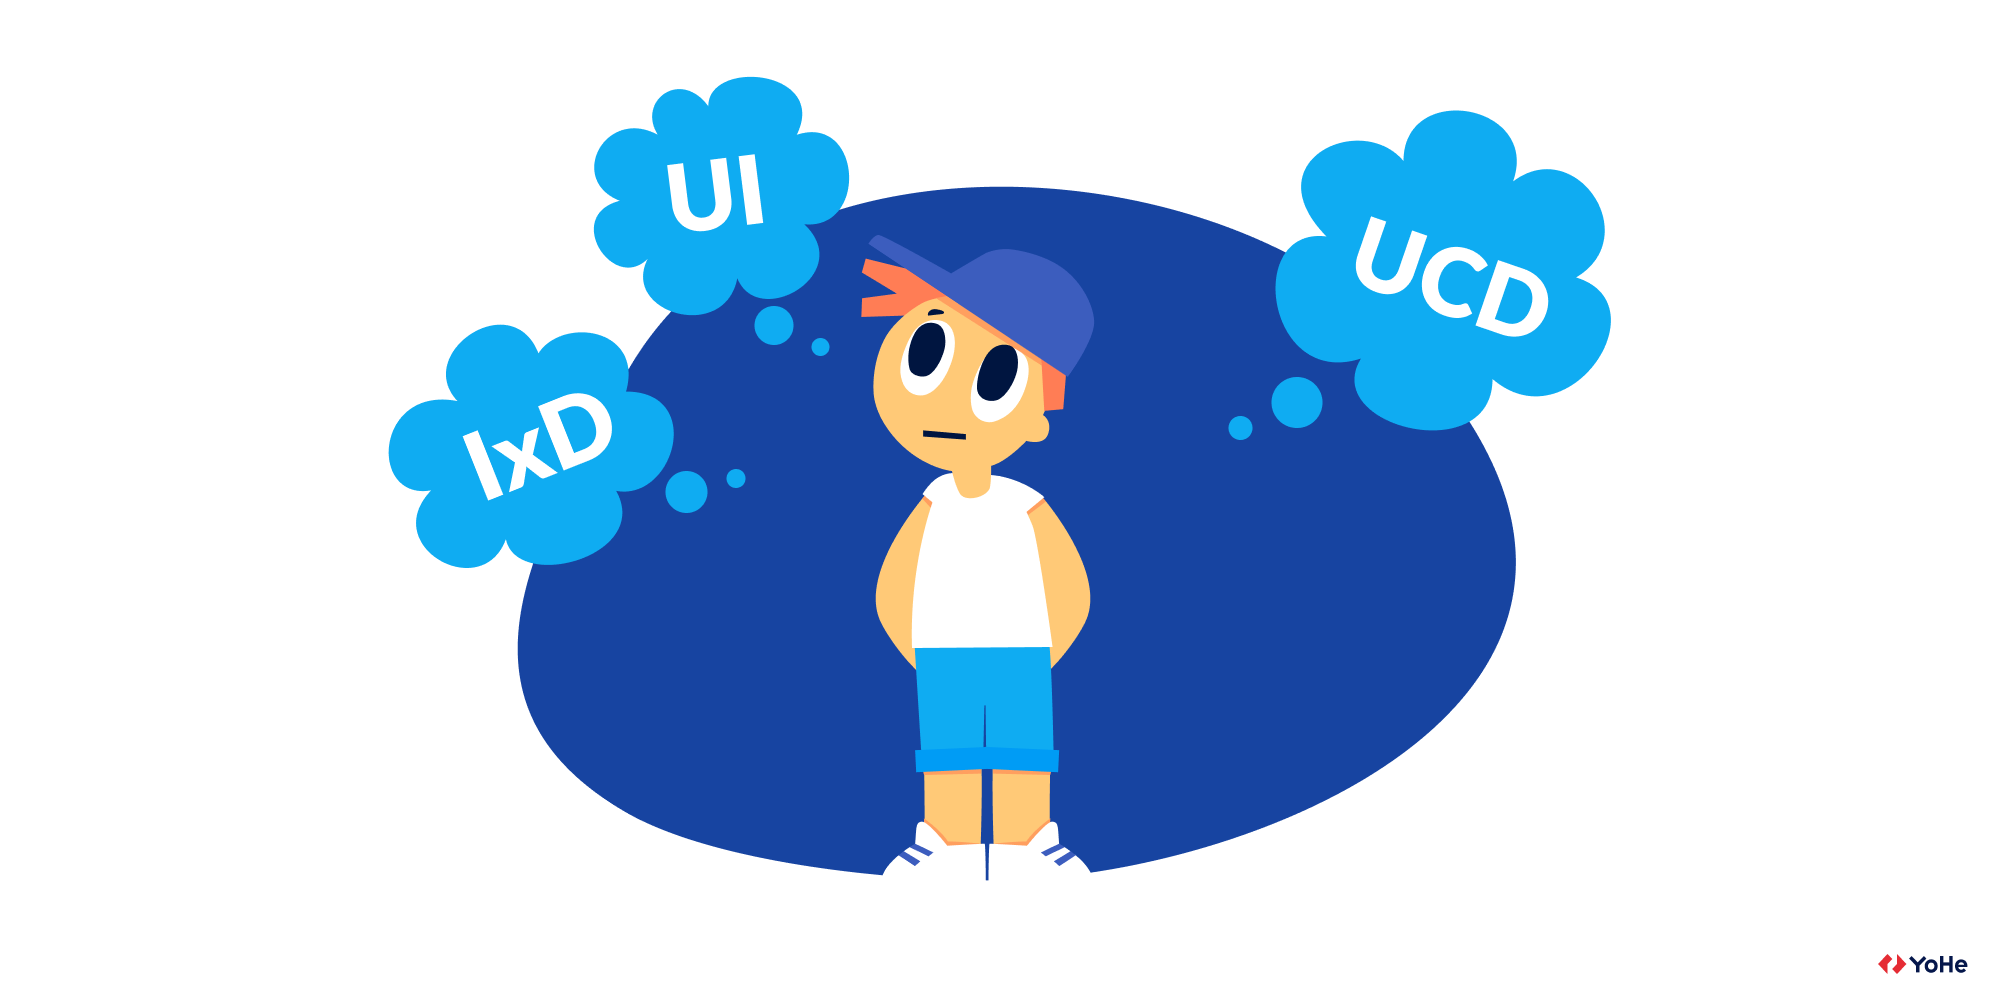 UCD, UI, IxD – how not to get confused in UX terms